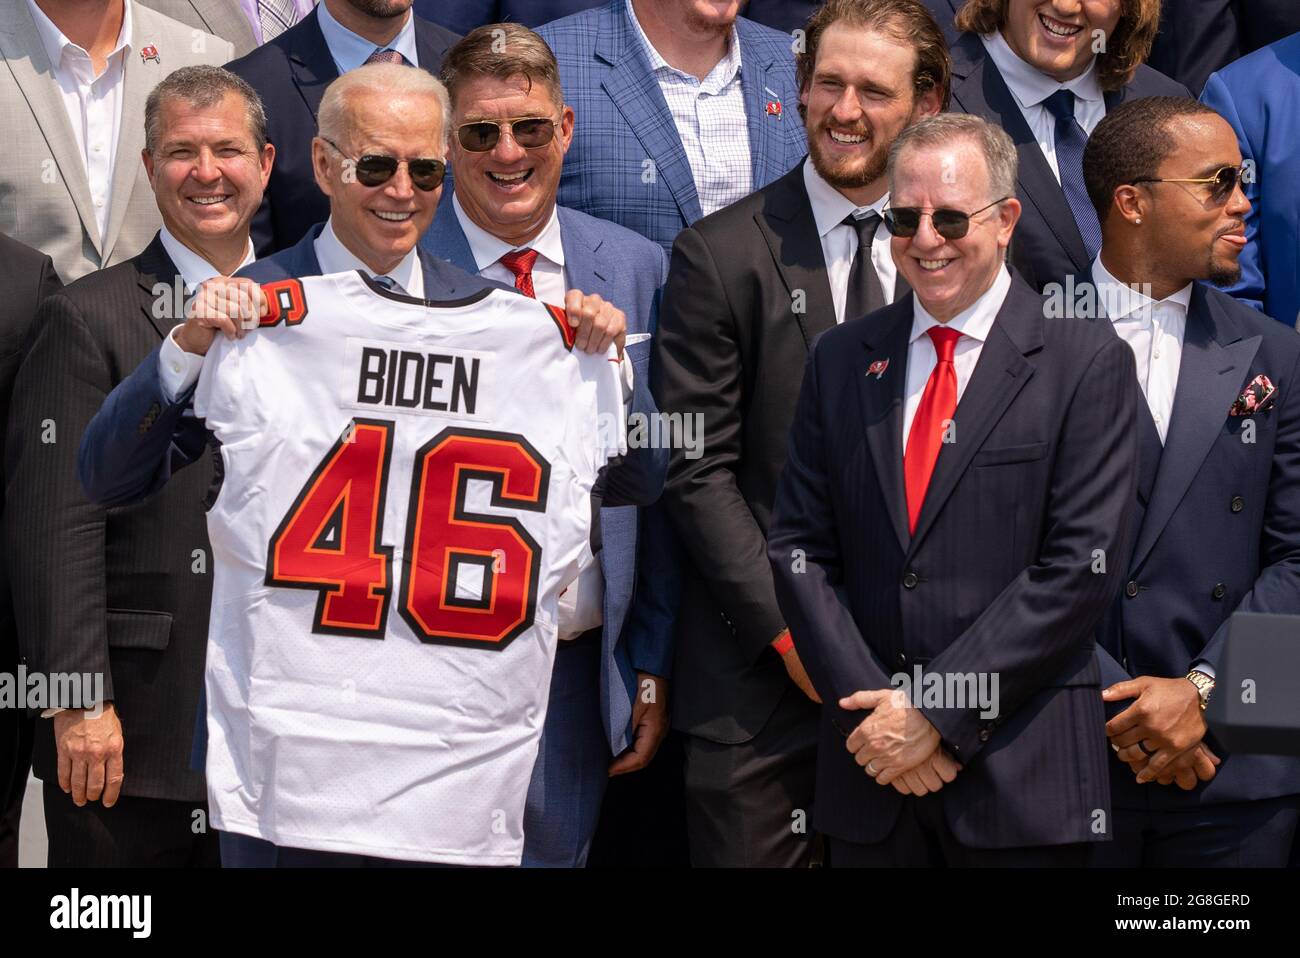 Washington, United States. 20th July, 2021. President Joe Biden, left, holds a number 46 jersey handed to him by Super Bowl Champions Tampa Bay Buccaneers owner Bryan Glazer, right, on the South Lawn of the White House in Washington, DC on Tuesday, July 20, 2021. Tampa Bay Defeated Kansas City Chiefs 31-9. Photo by Ken Cedeno/UPI Credit: UPI/Alamy Live News Stock Photo